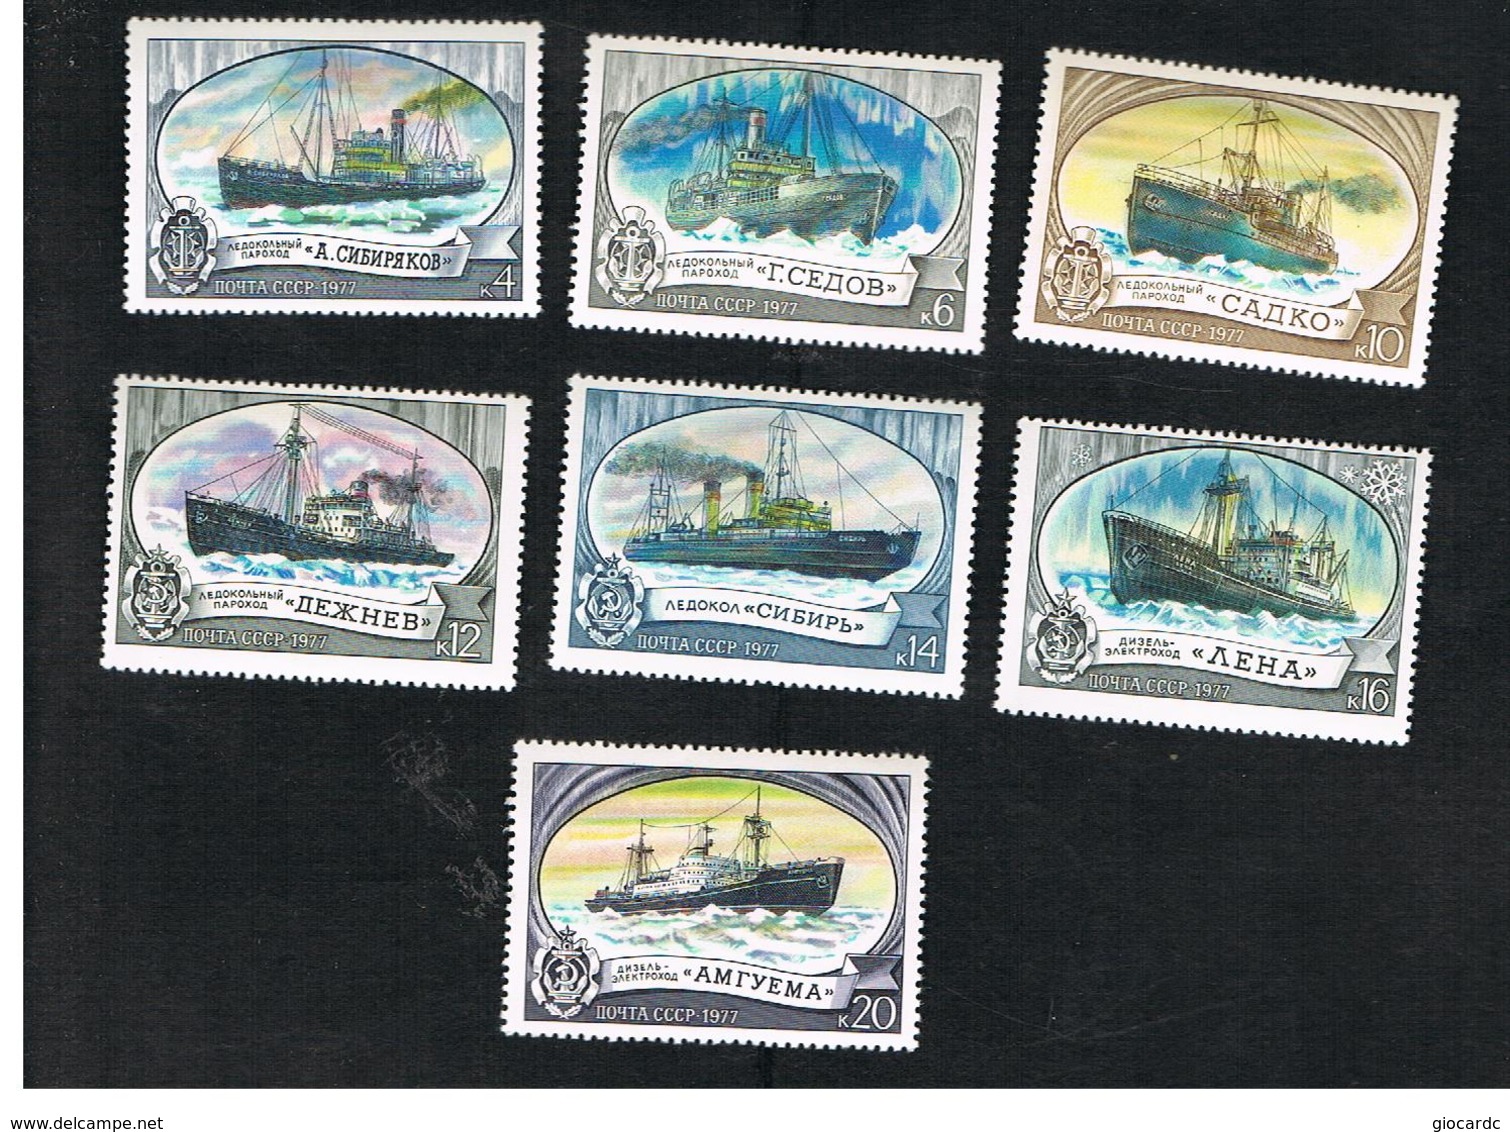 URSS -  YV. 4386.4391  -  1977 SOVIET ICE-BREAKERS SHIPS  (COMPLET SET OF 7)   - MINT** - Ungebraucht